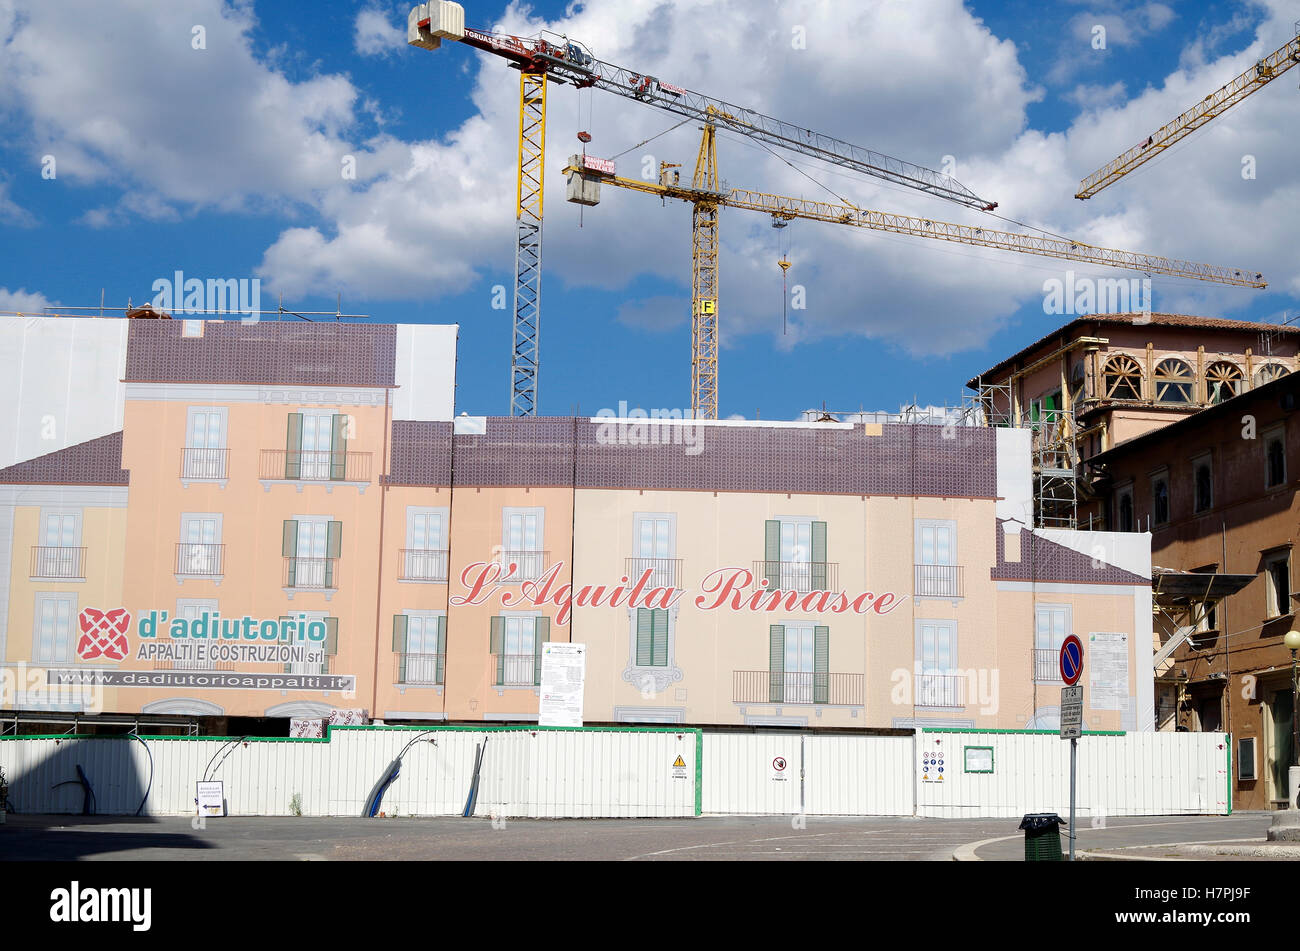 L'Aquila, Italy, Buildings in main square being rebuilt after 2009 earthquake, protective sheeting with illustration of building facades Stock Photo